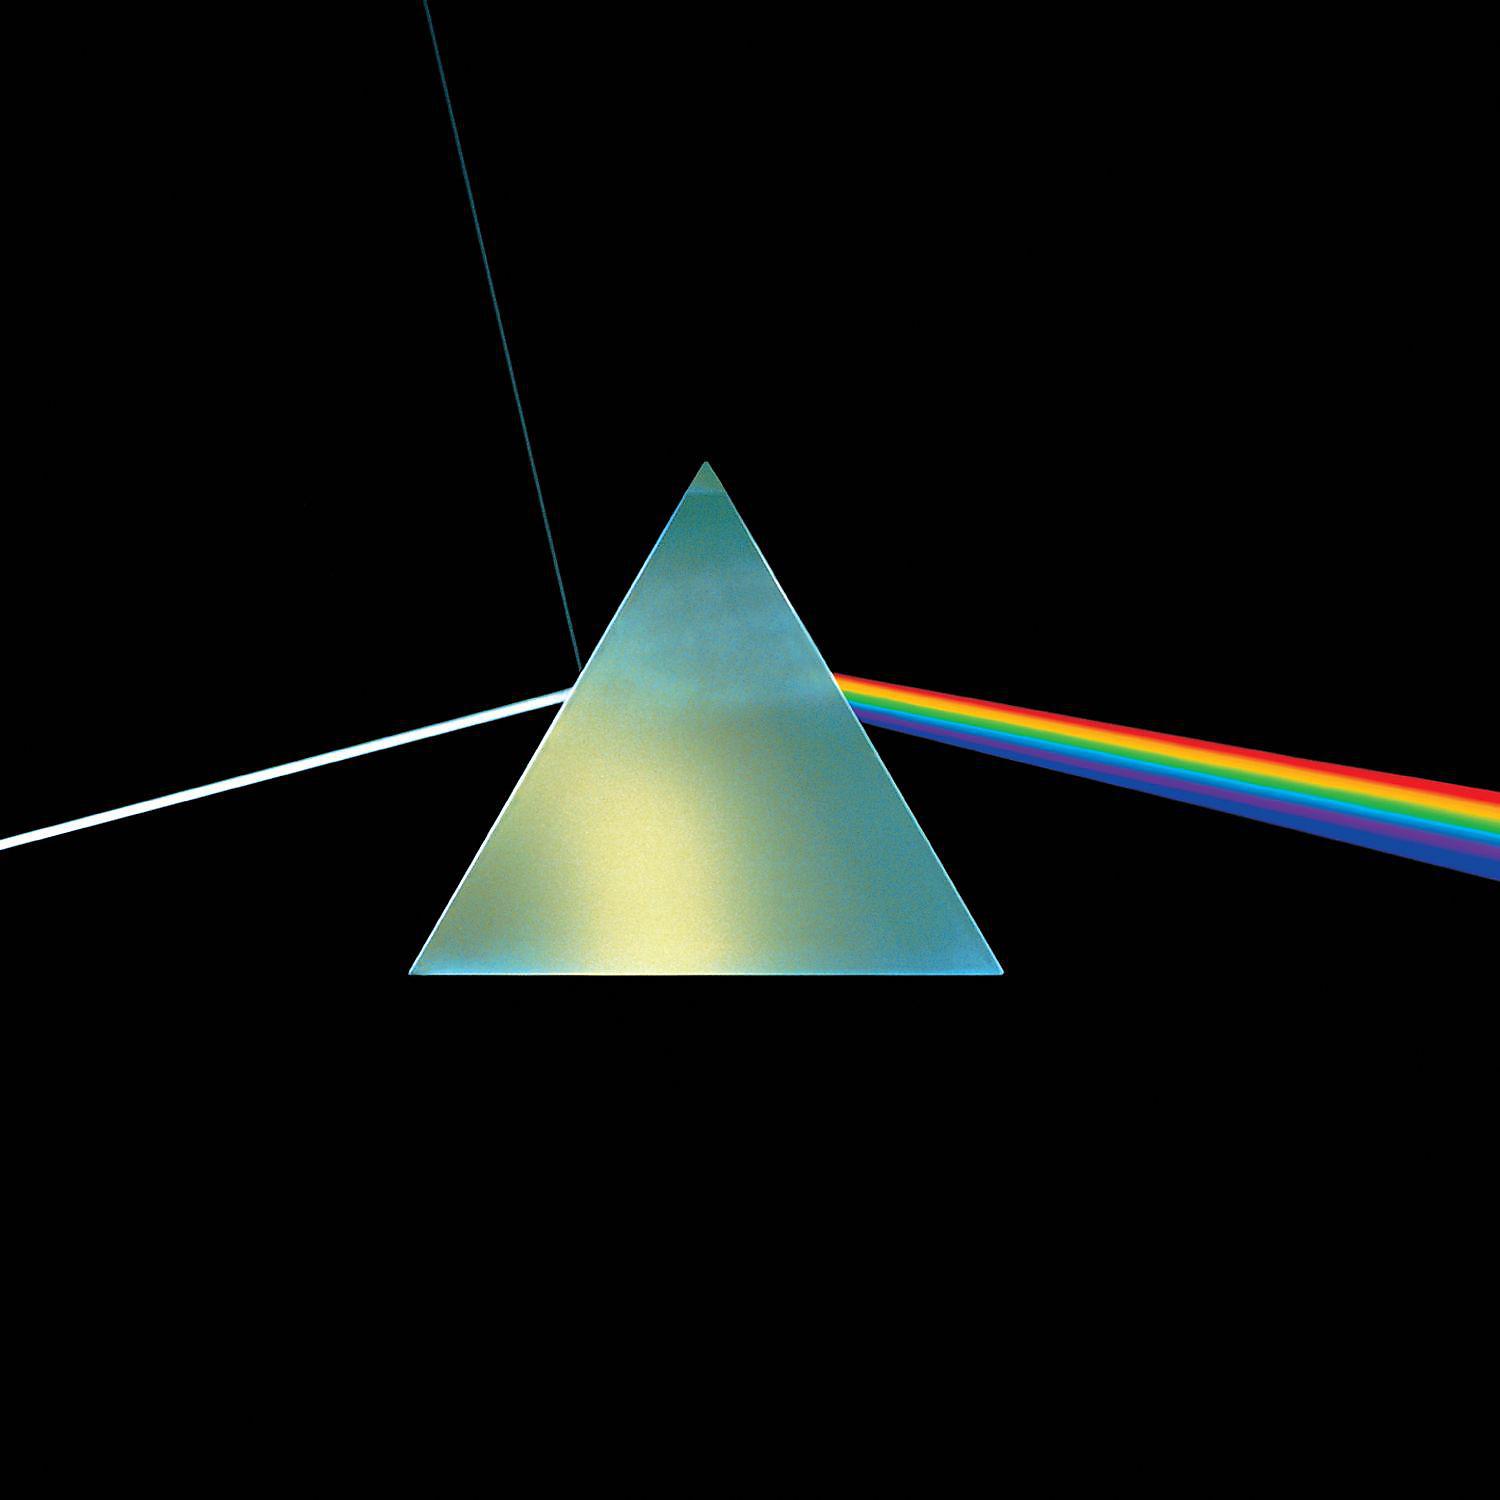 The Dark Side Of The Moon (2011 Remastered Version)